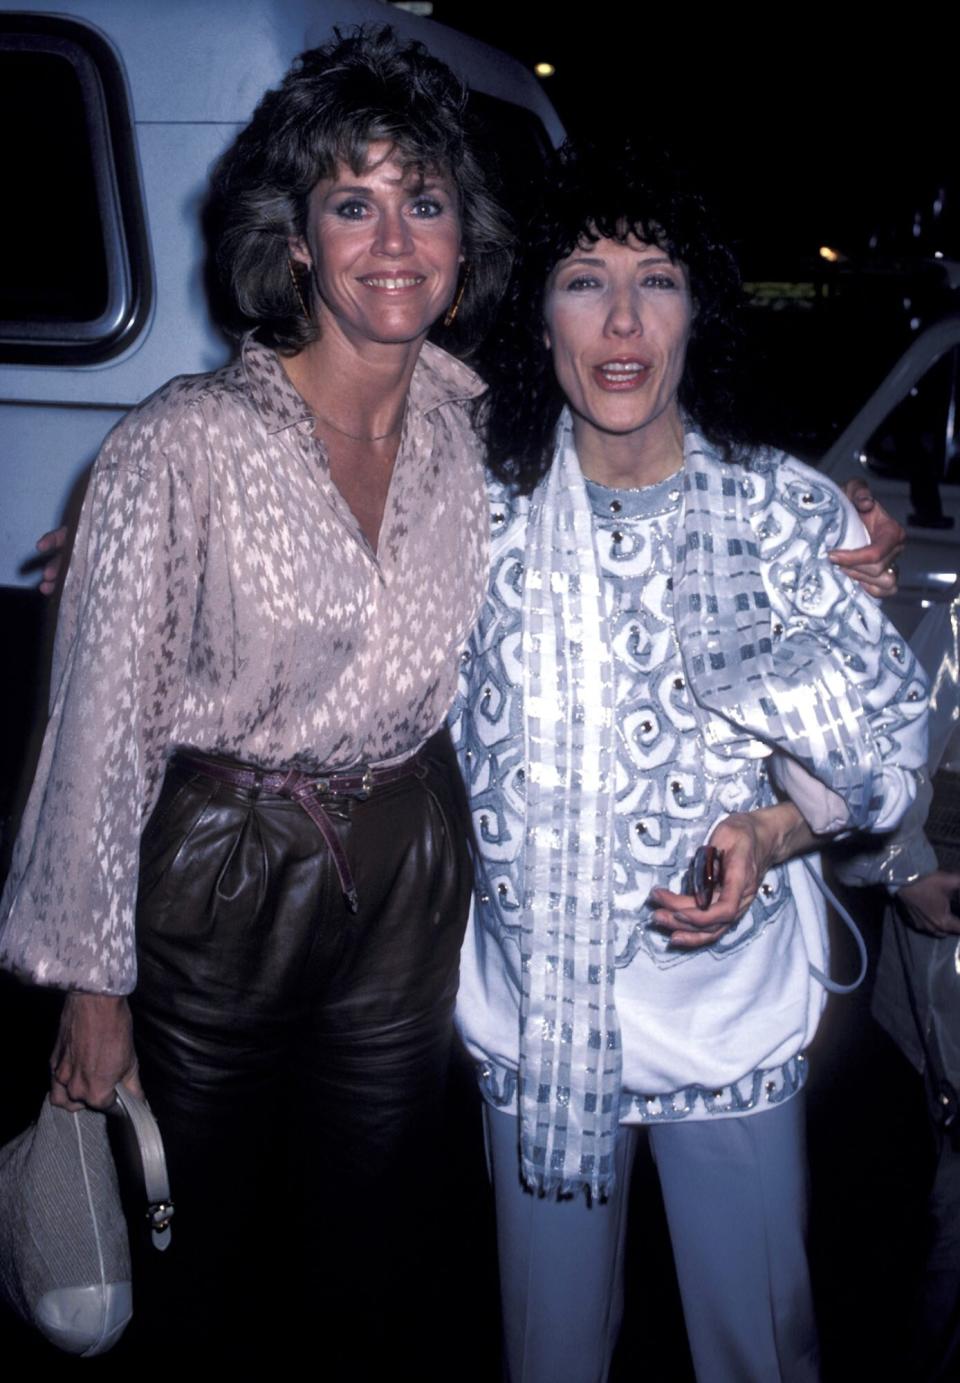 Jane Fonda and Lily Tomlin during Screening of Search for Signs - June 23, 1986 at Plymouth Theater in New York City